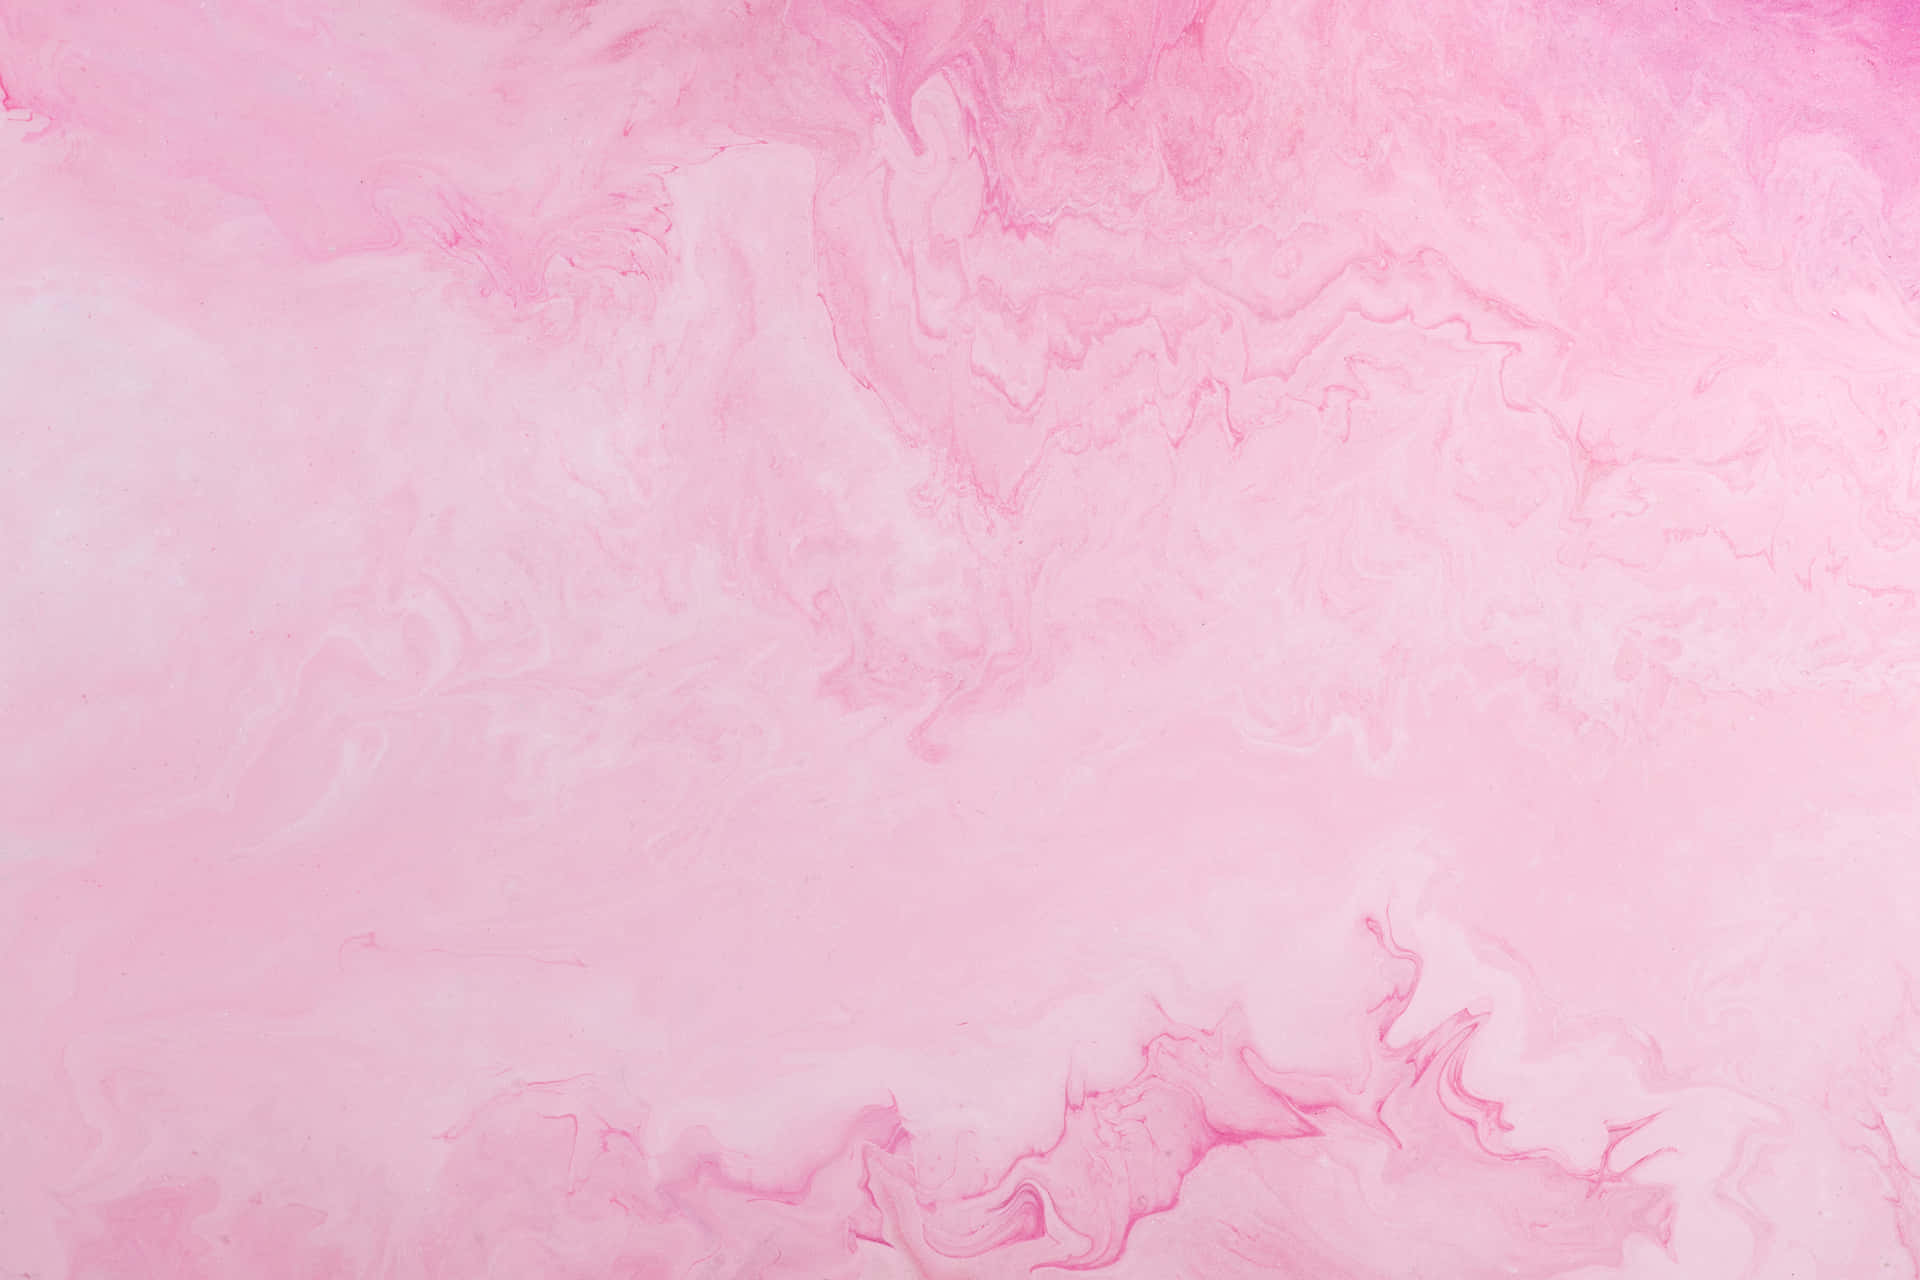 Soft pink background with a hint of subtle texture